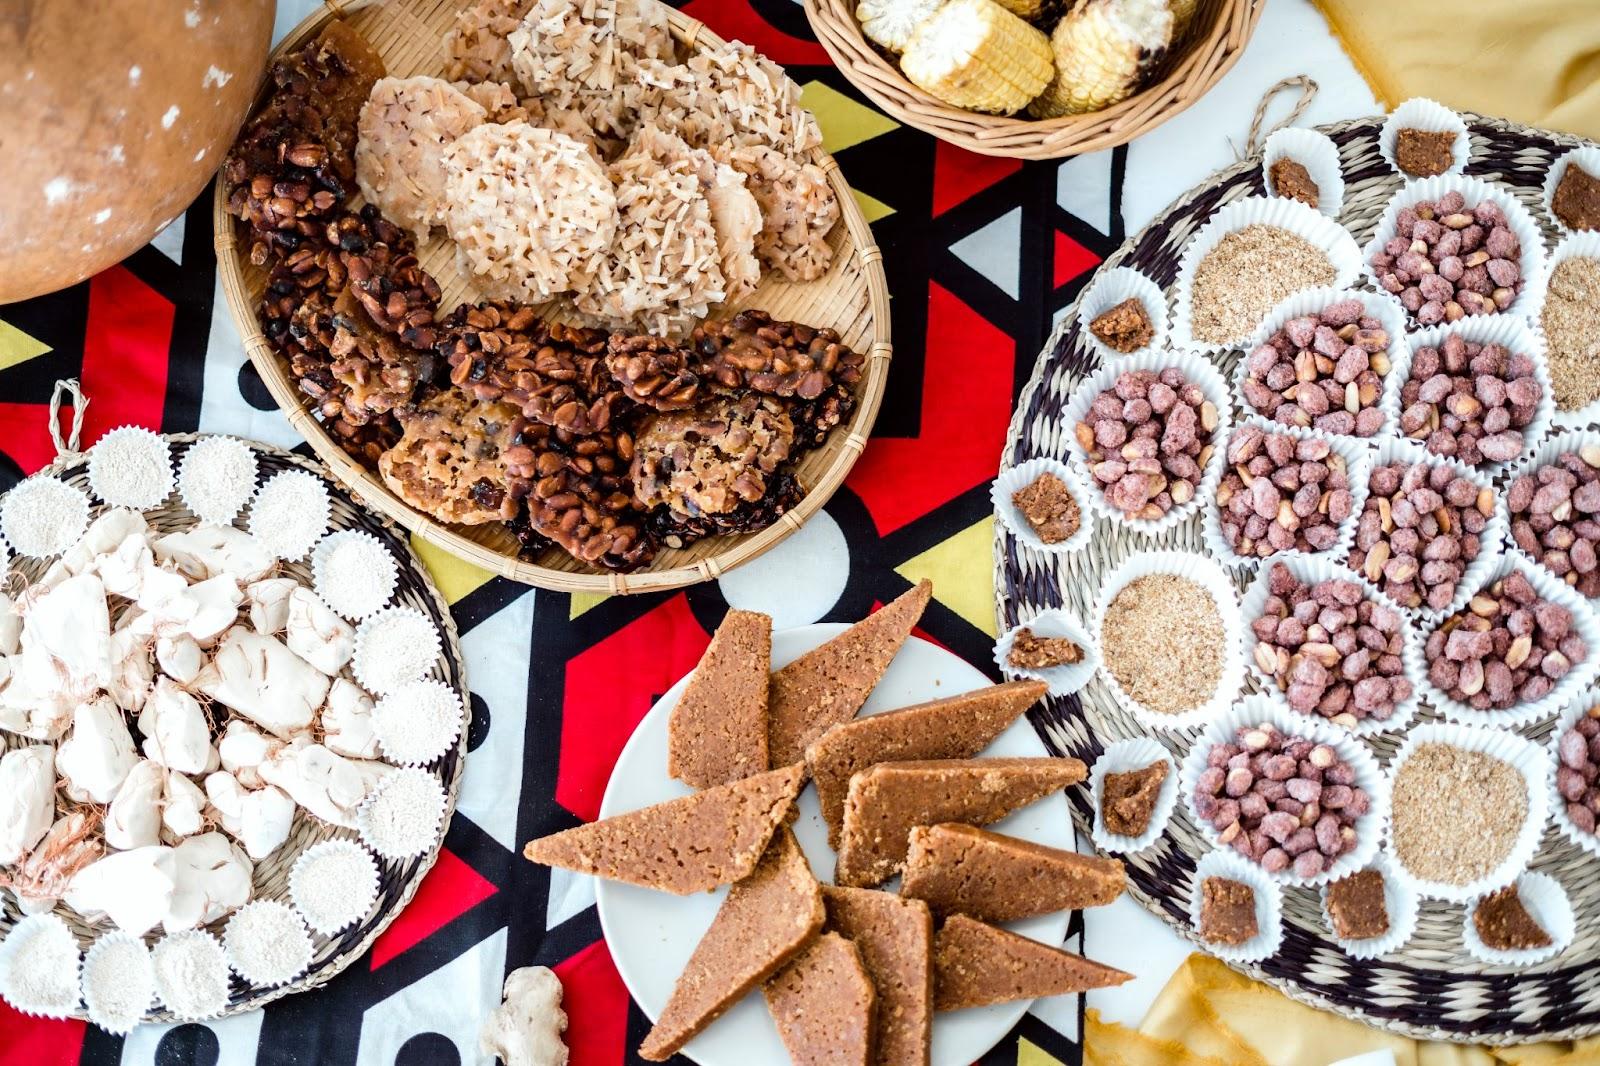 Variety of delicious dessert from Angola on a table covered with African fabric